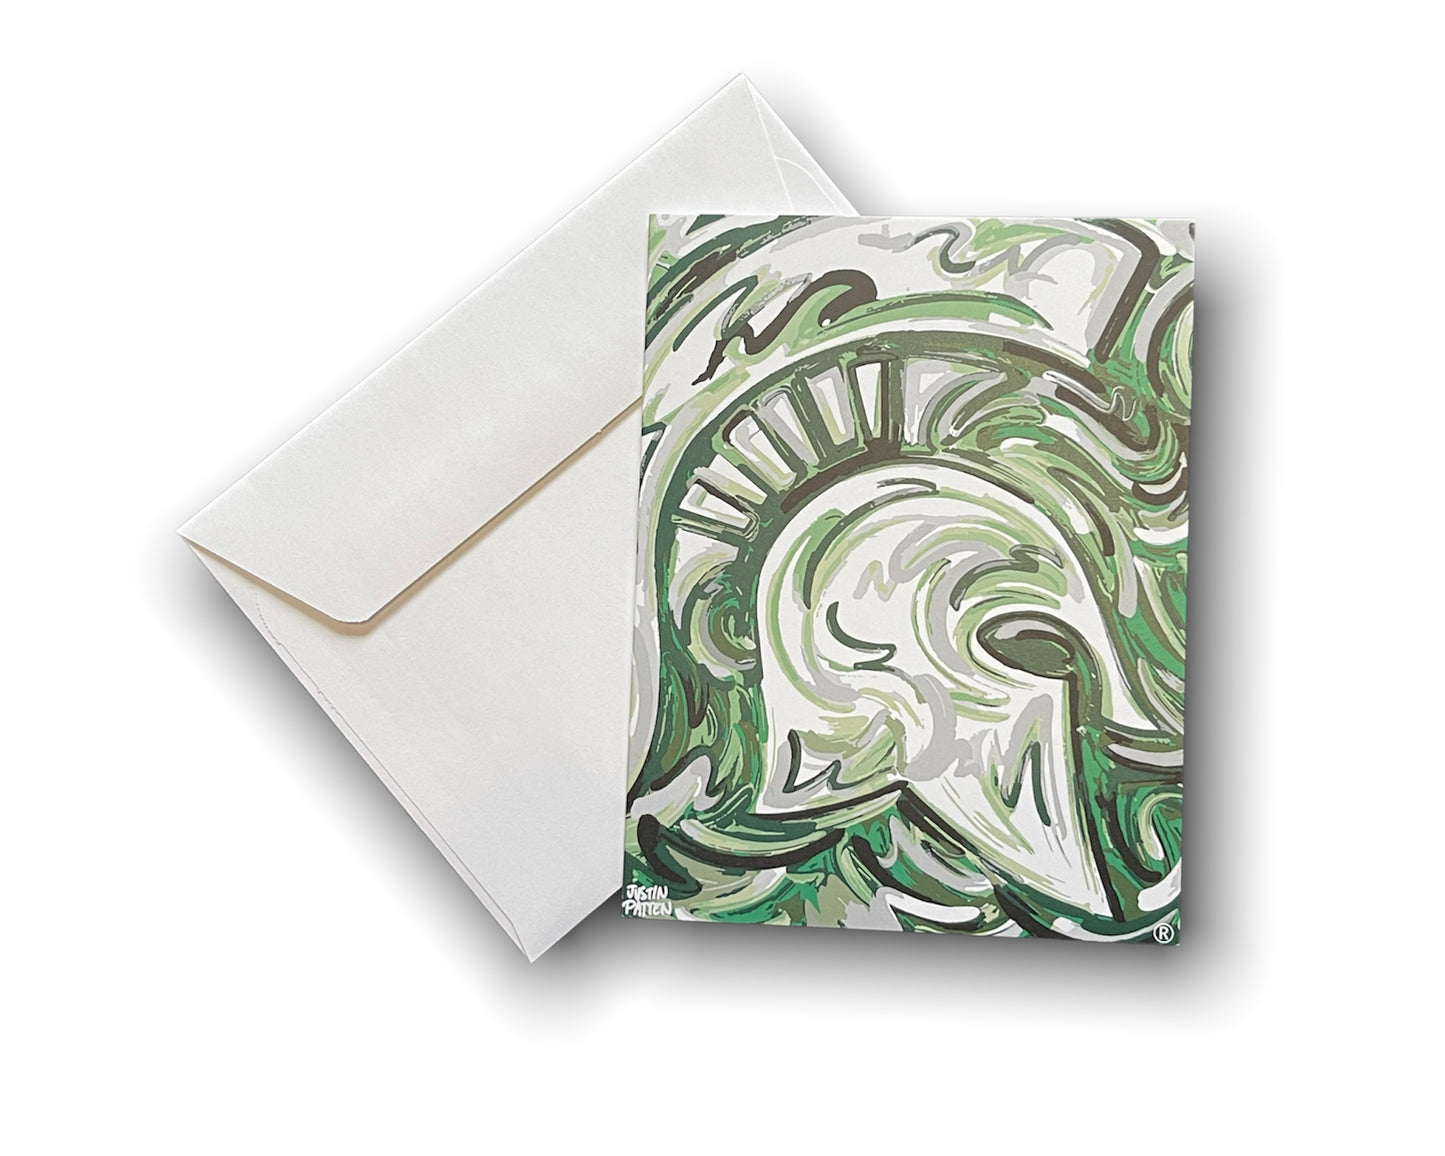 Michigan State University Full Color Note Card Set of 6 by Justin Patten